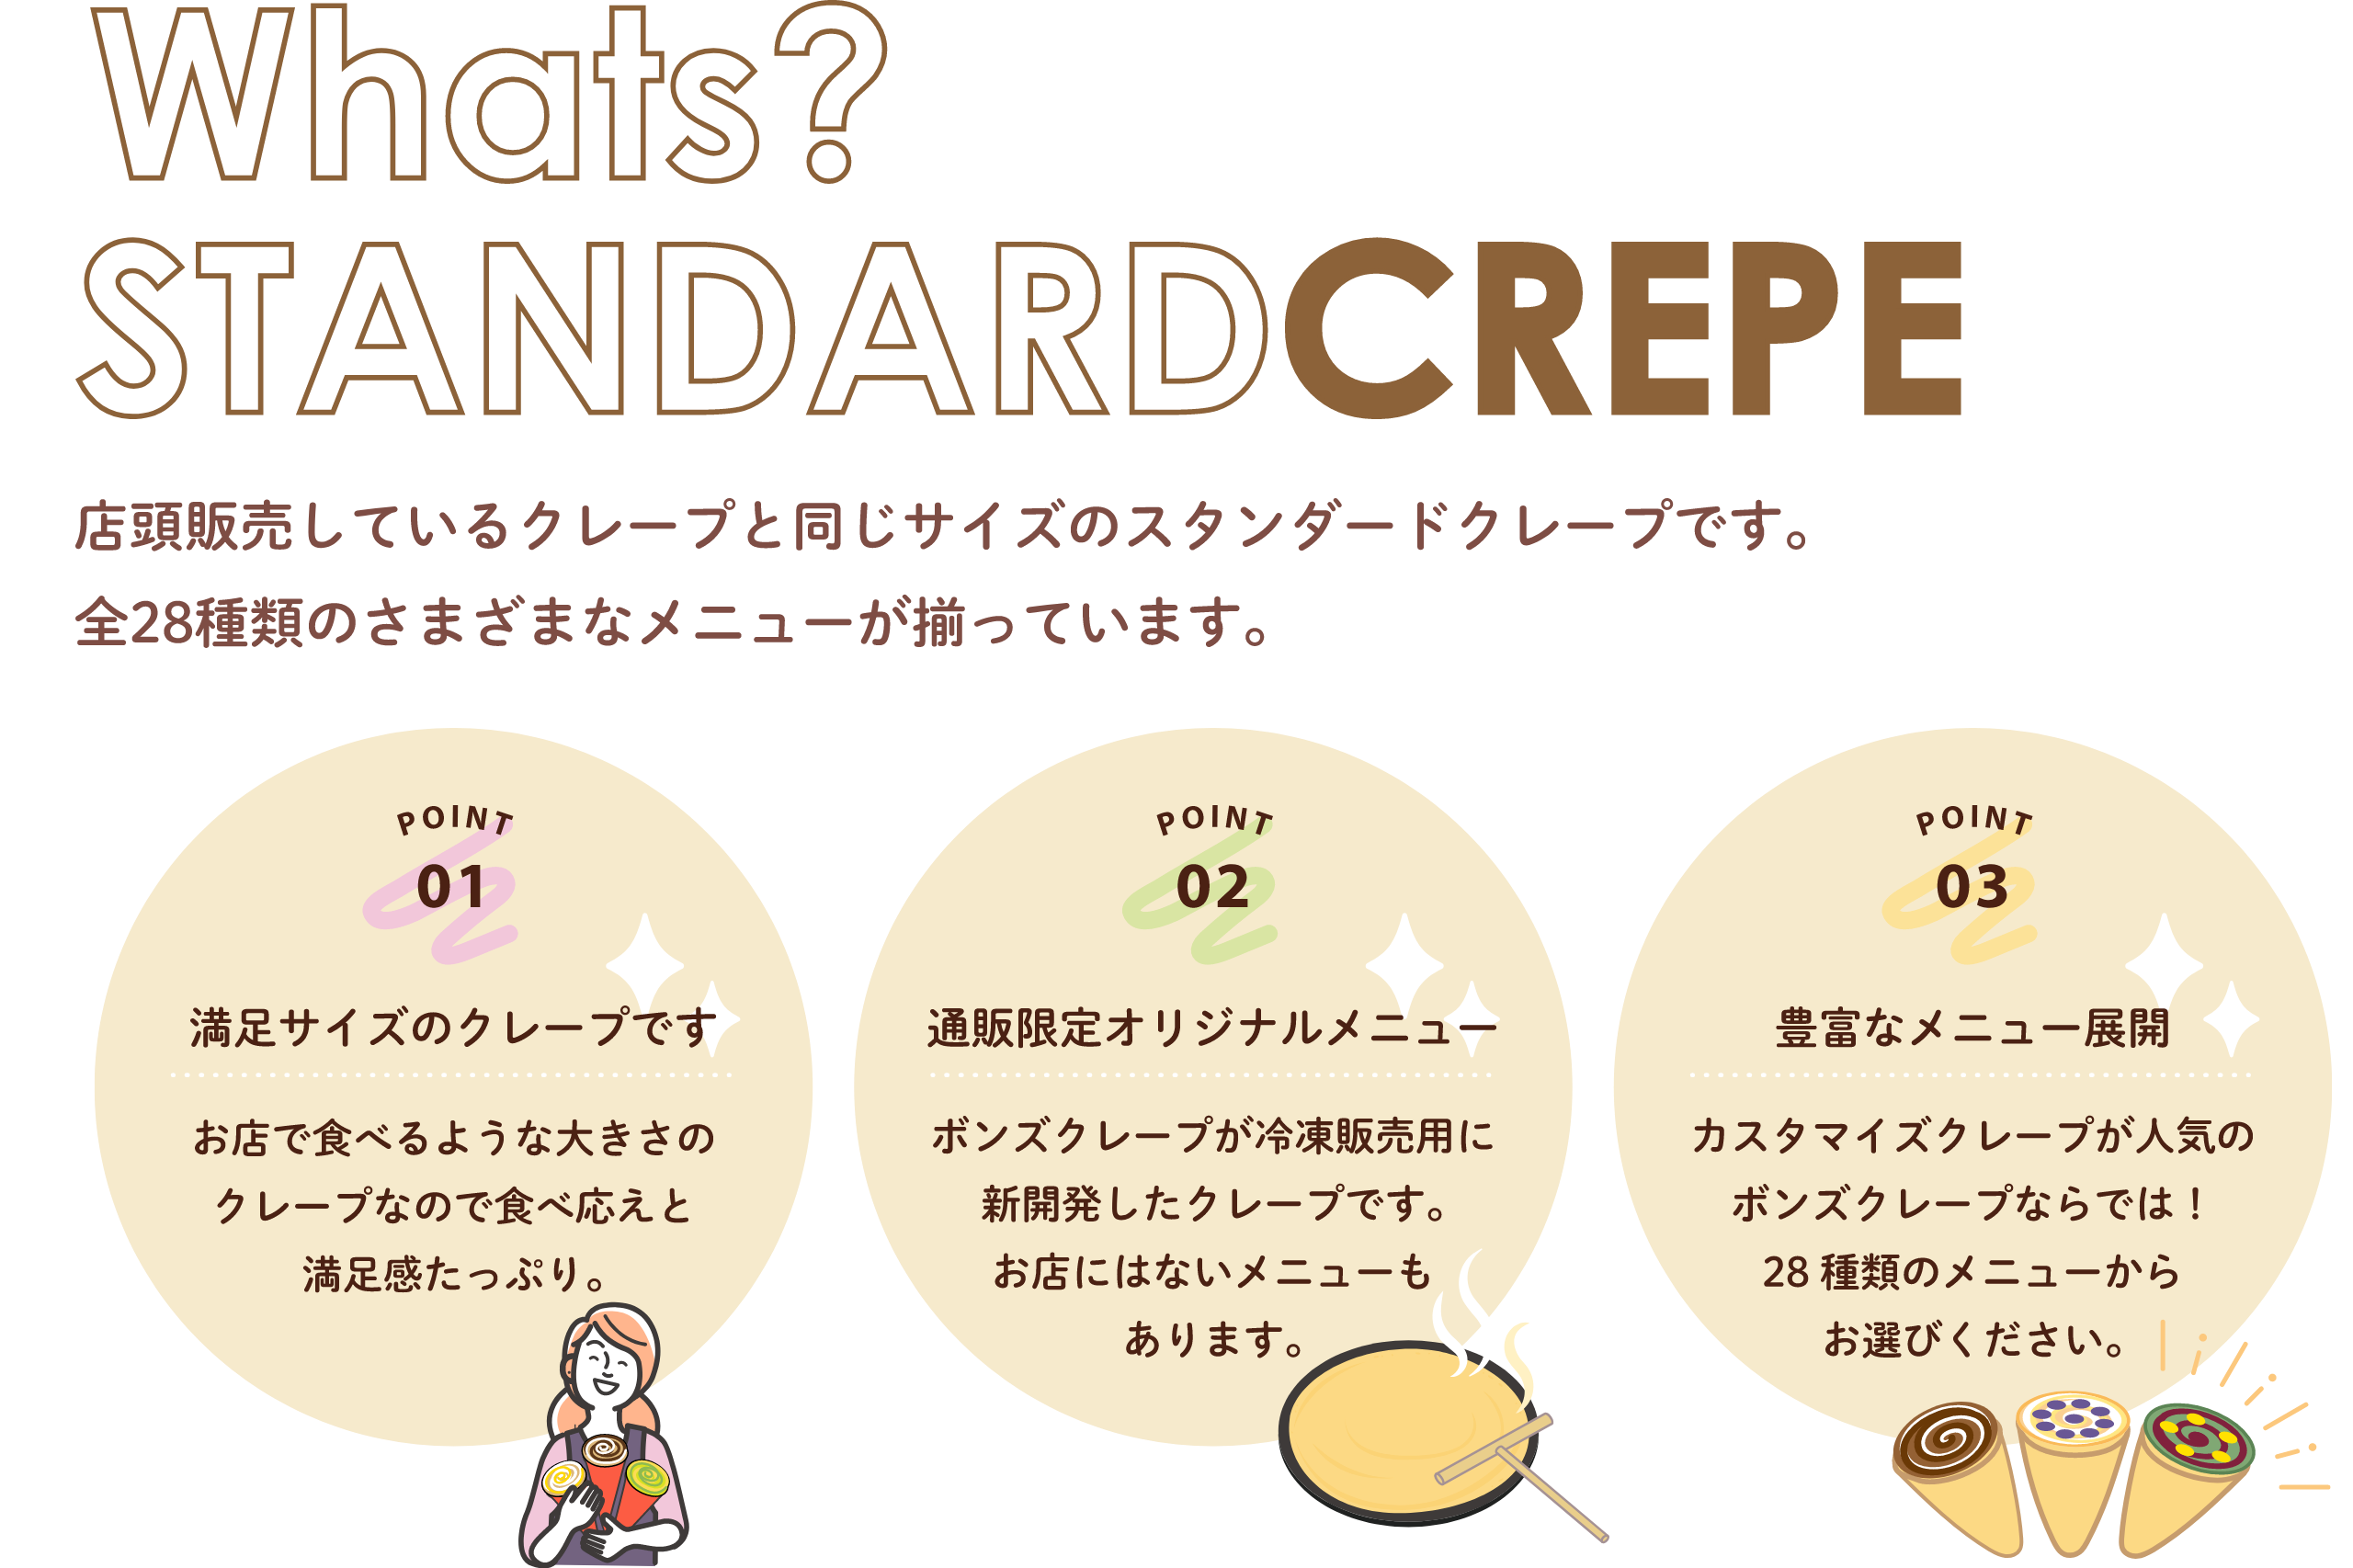 Whats? Standard crepe